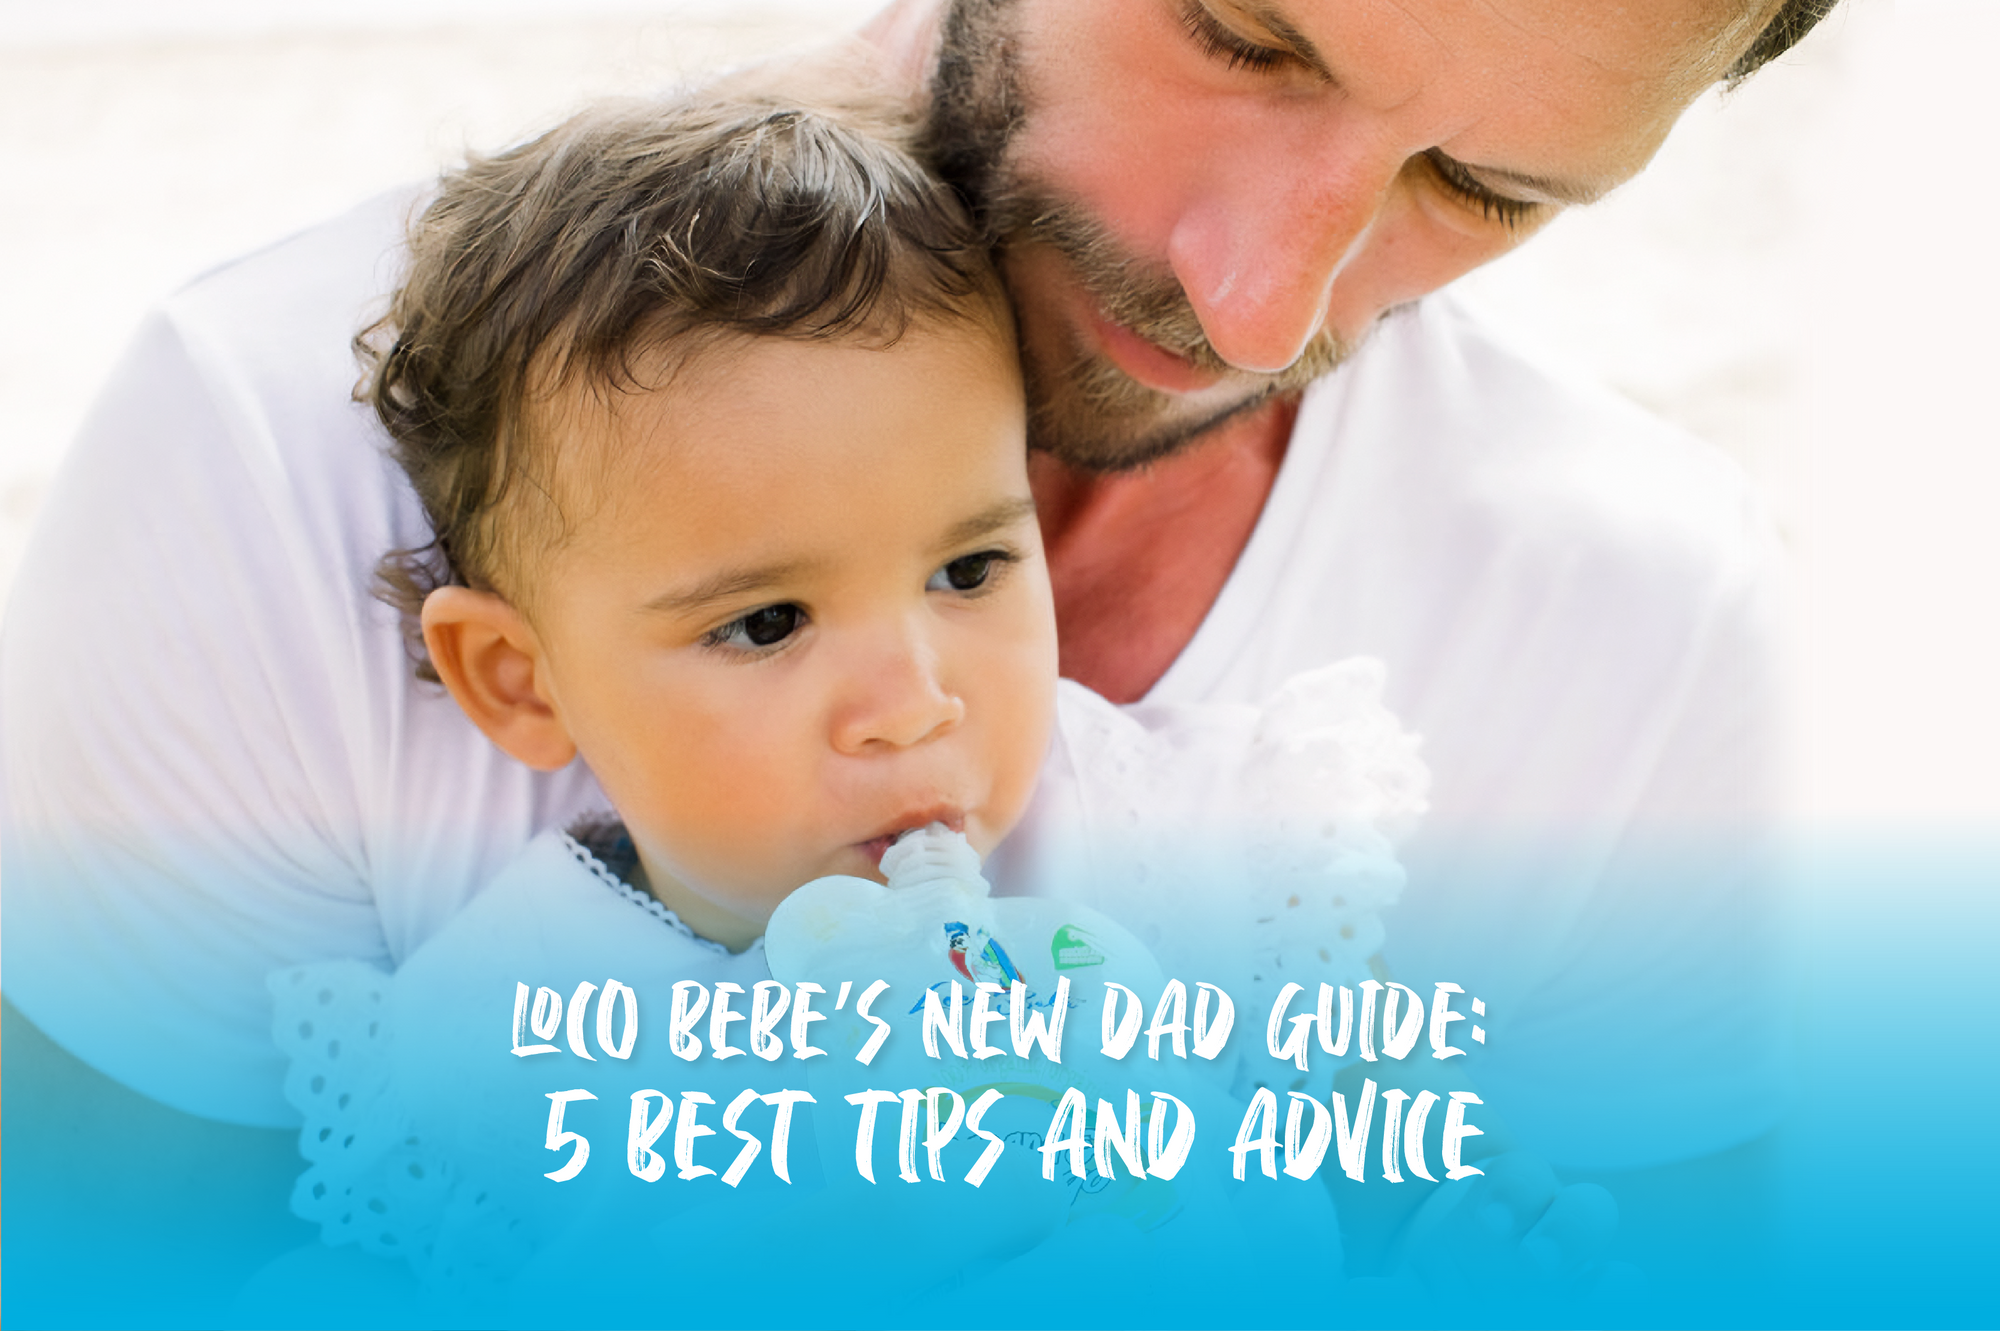 Loco Bebe’s New Dad Guide: 5 Best Tips and Advice